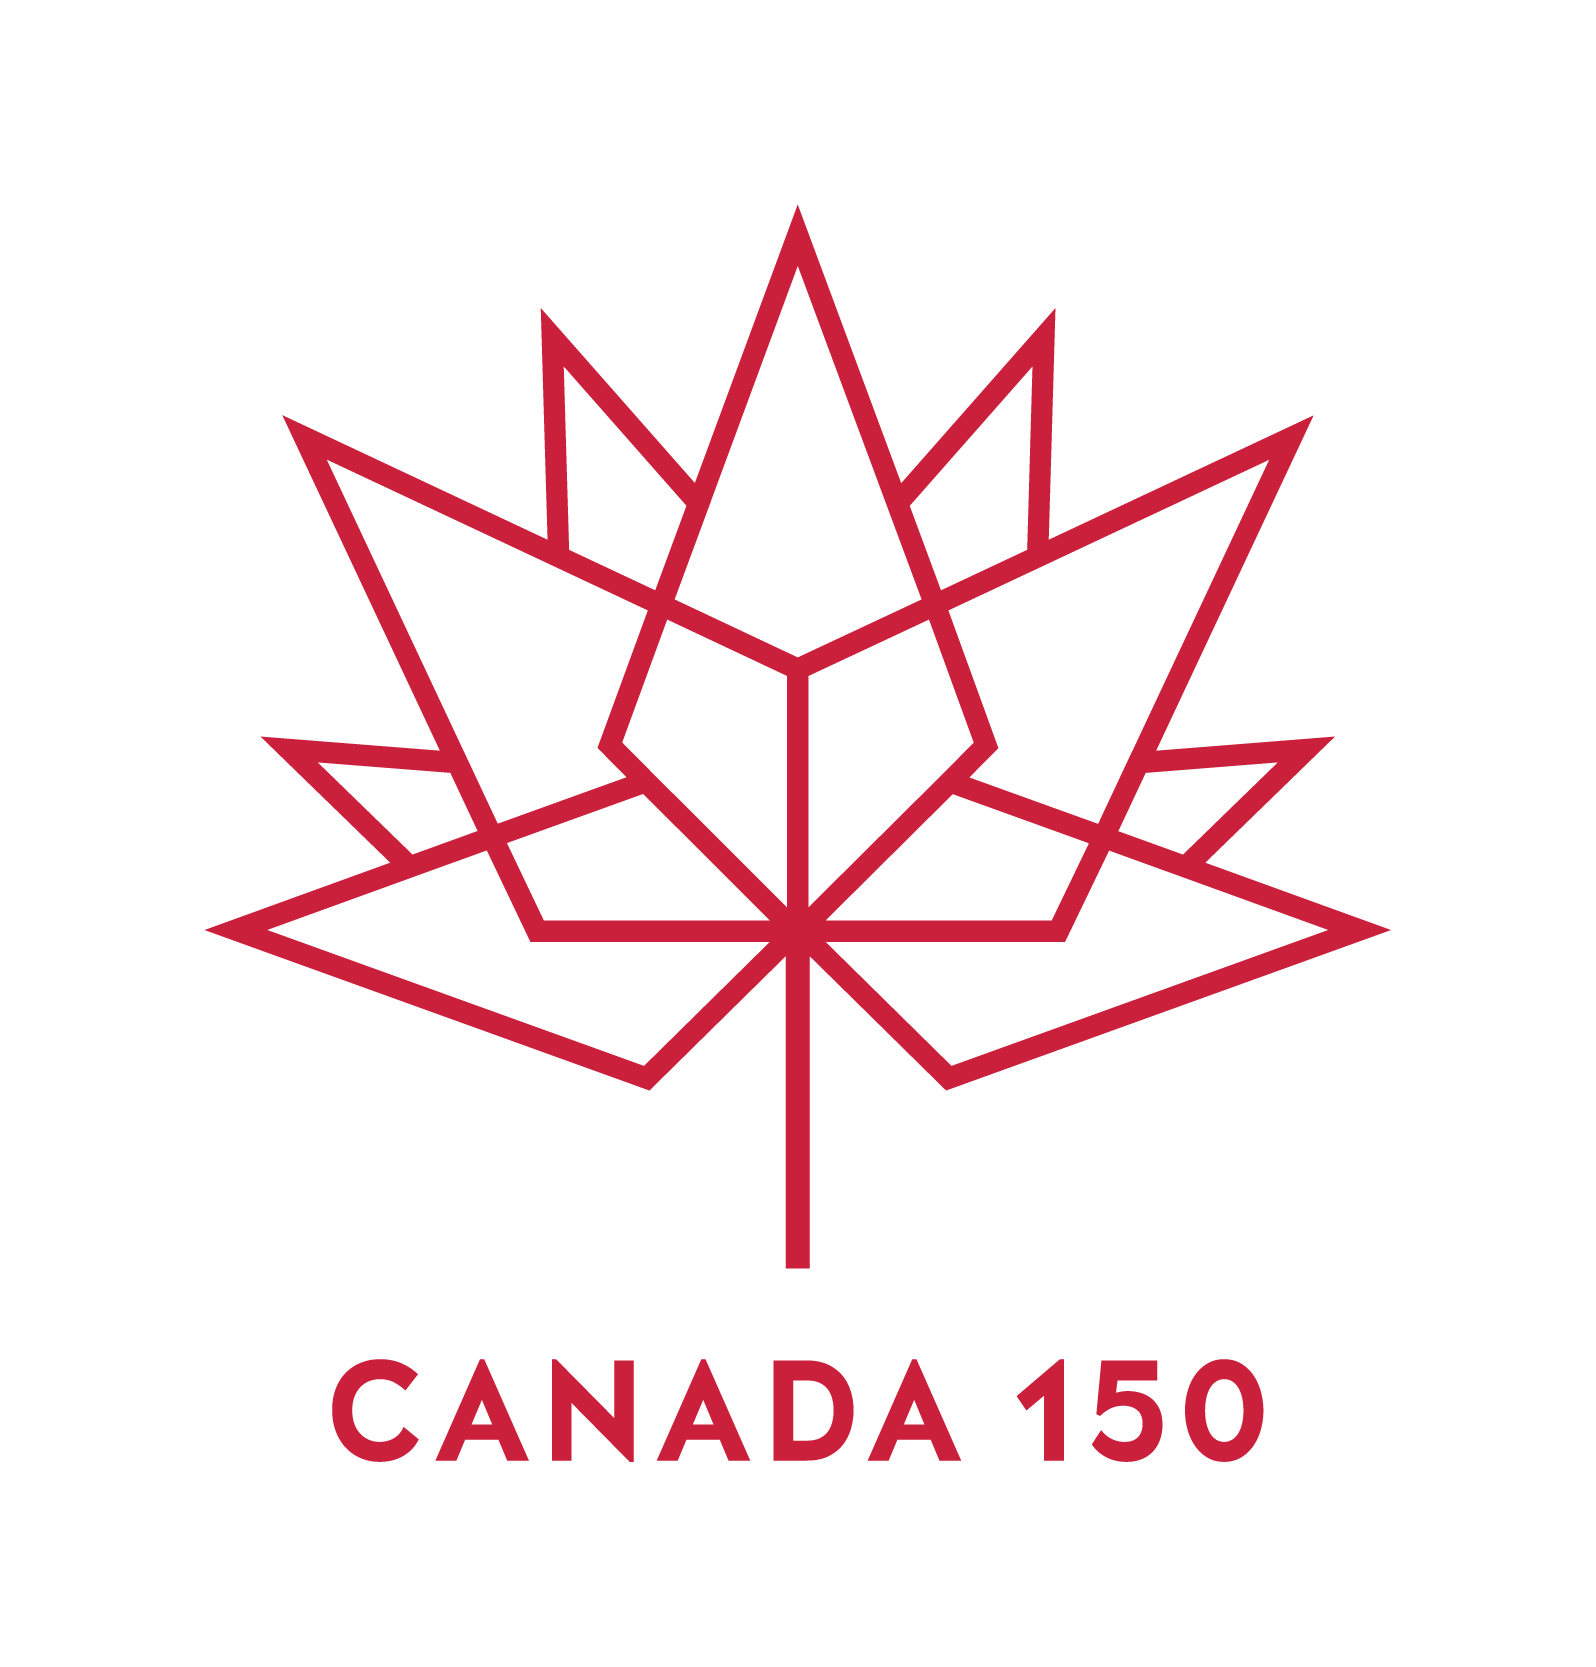 Canada 150 Logo on Printed T-Shirts and Promo Products